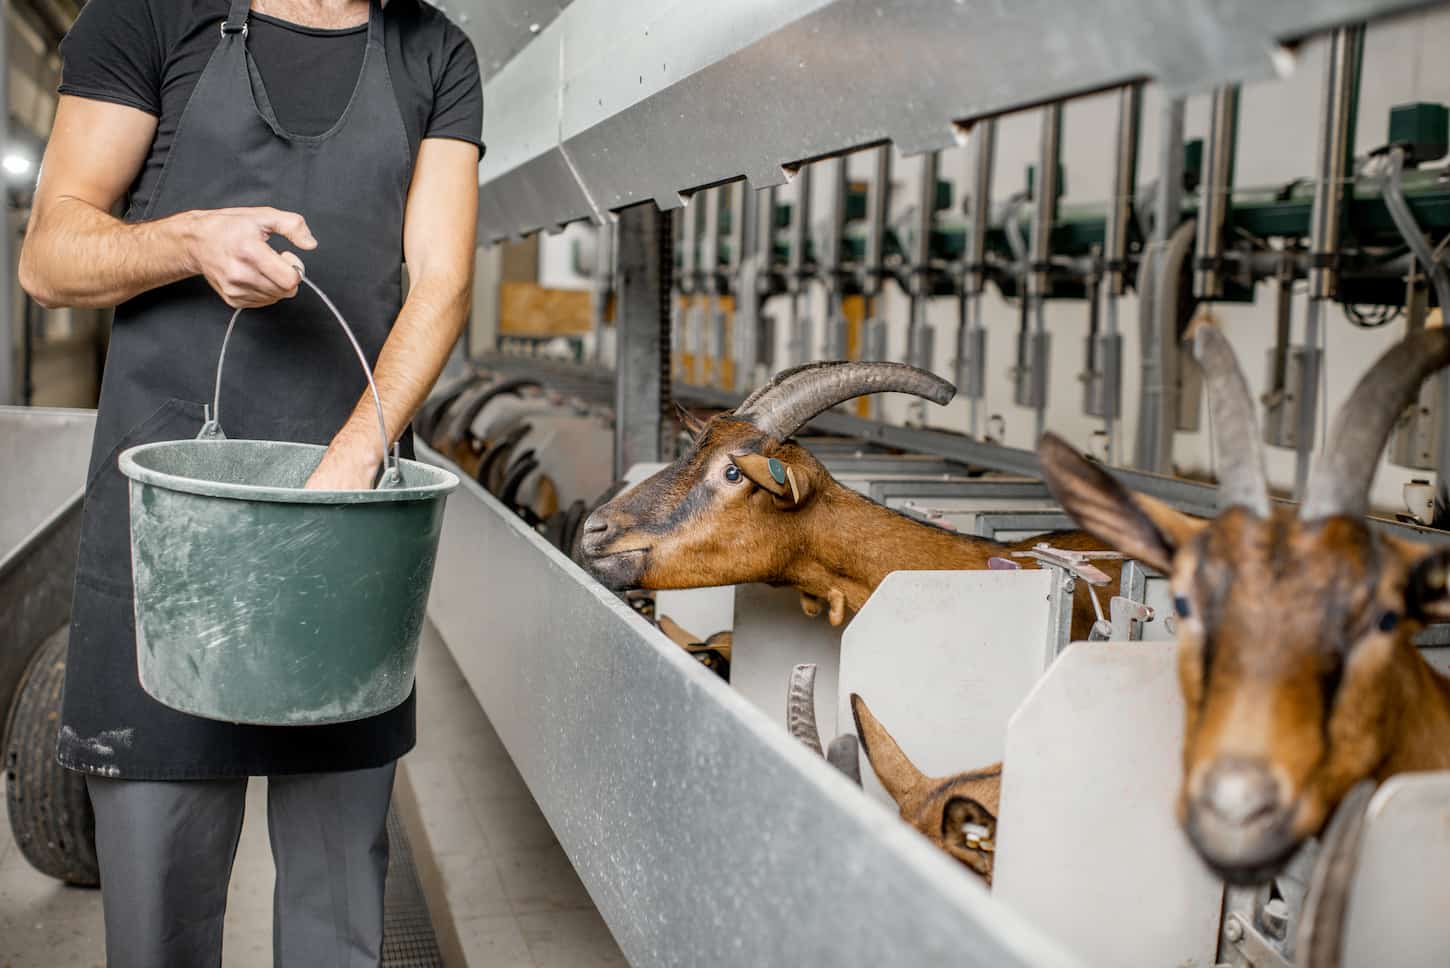 An image of a man feeding goats during the milking process at the automated milking line.